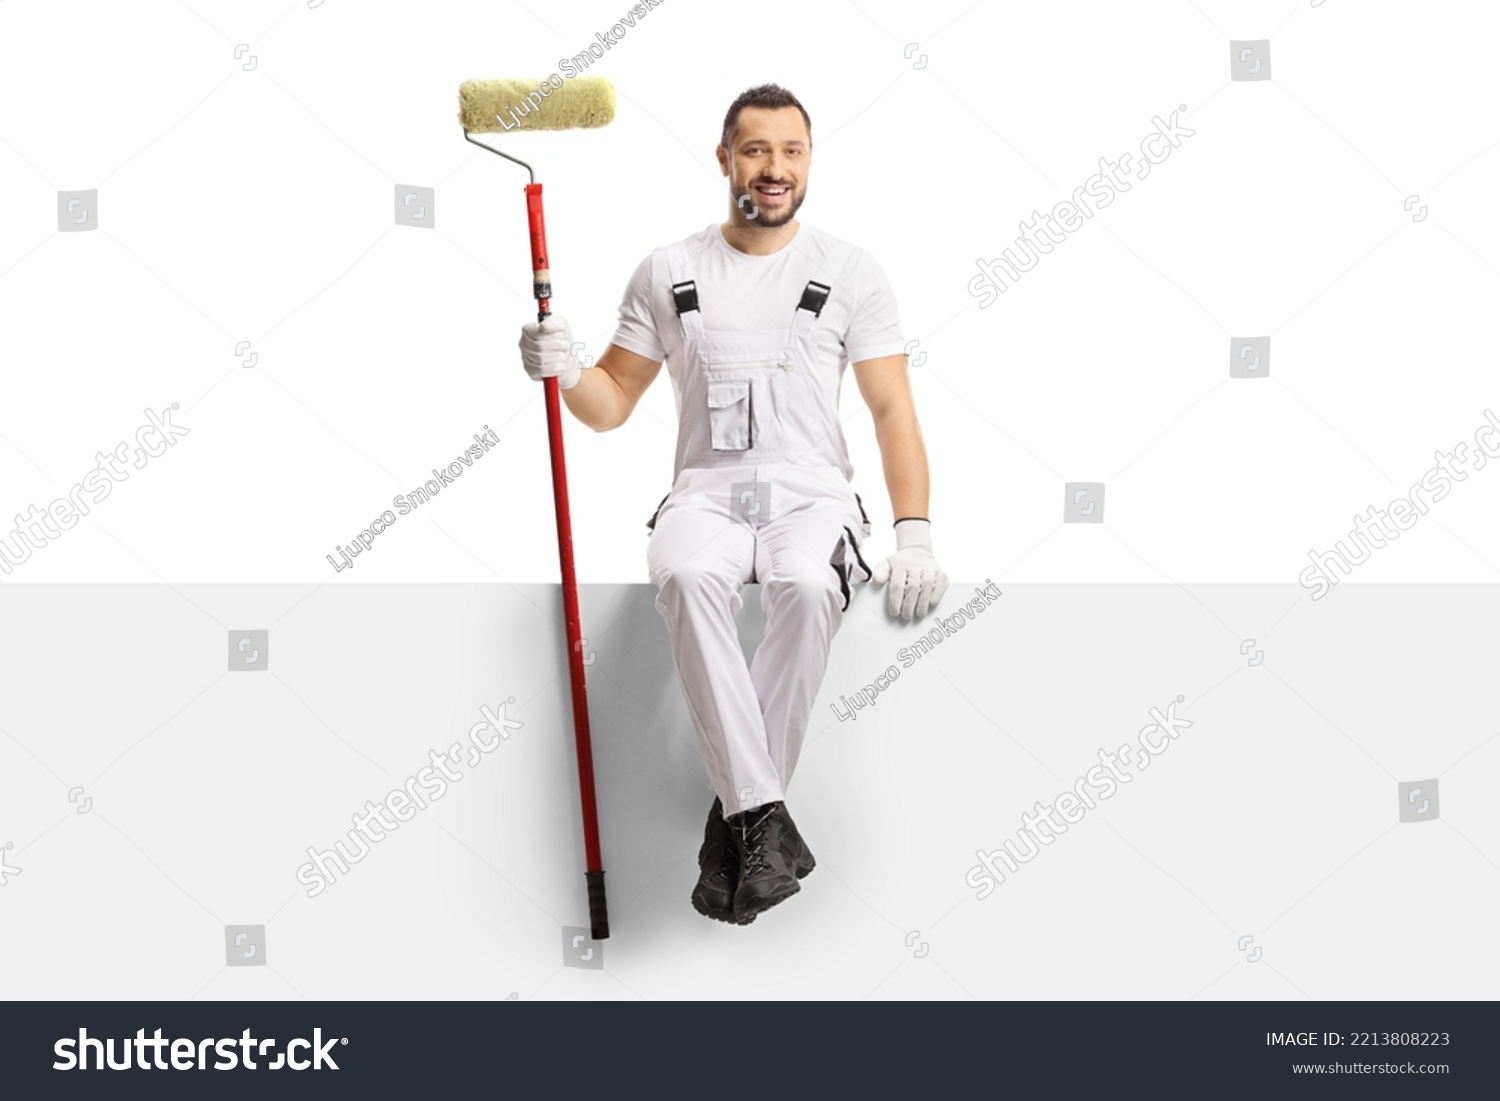 Painter holding a paint roller and sitting on a blank panel isolated on white background #2213808223